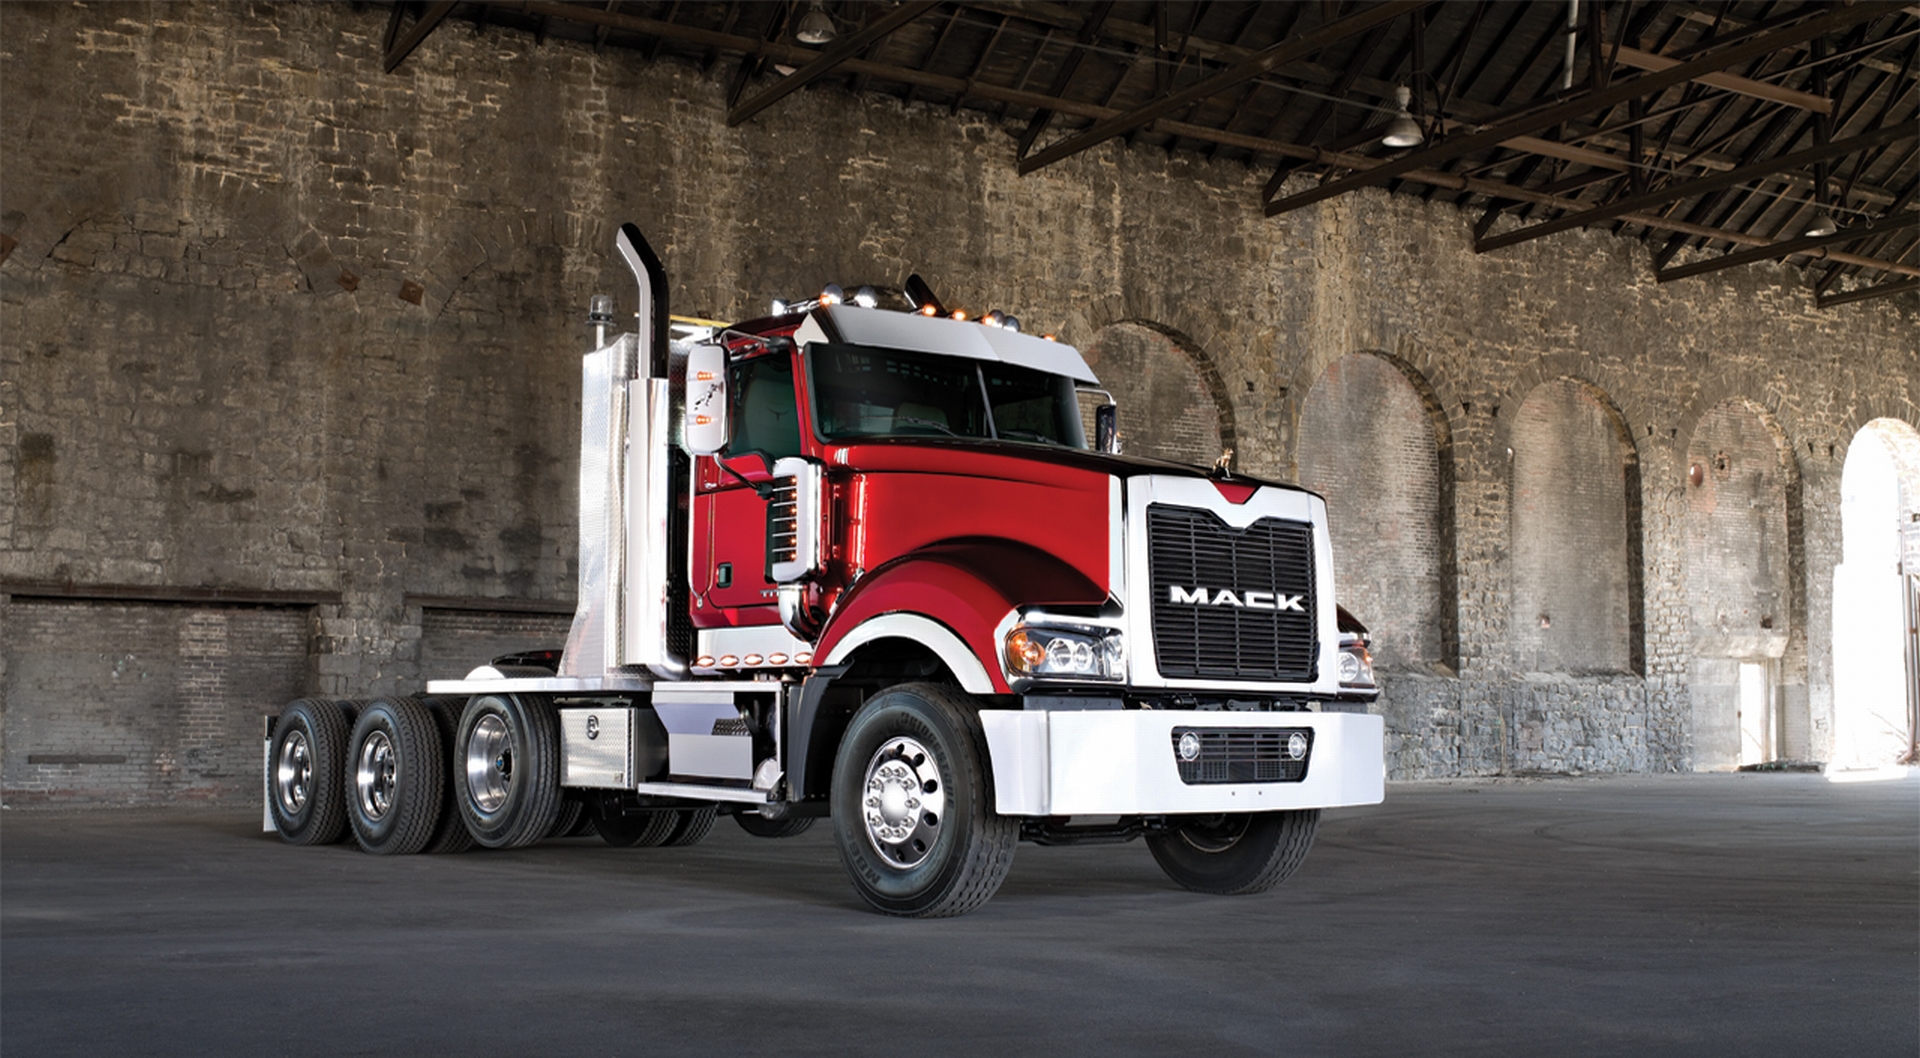 A parked Mack truck with a striking design, ready to hit the road.